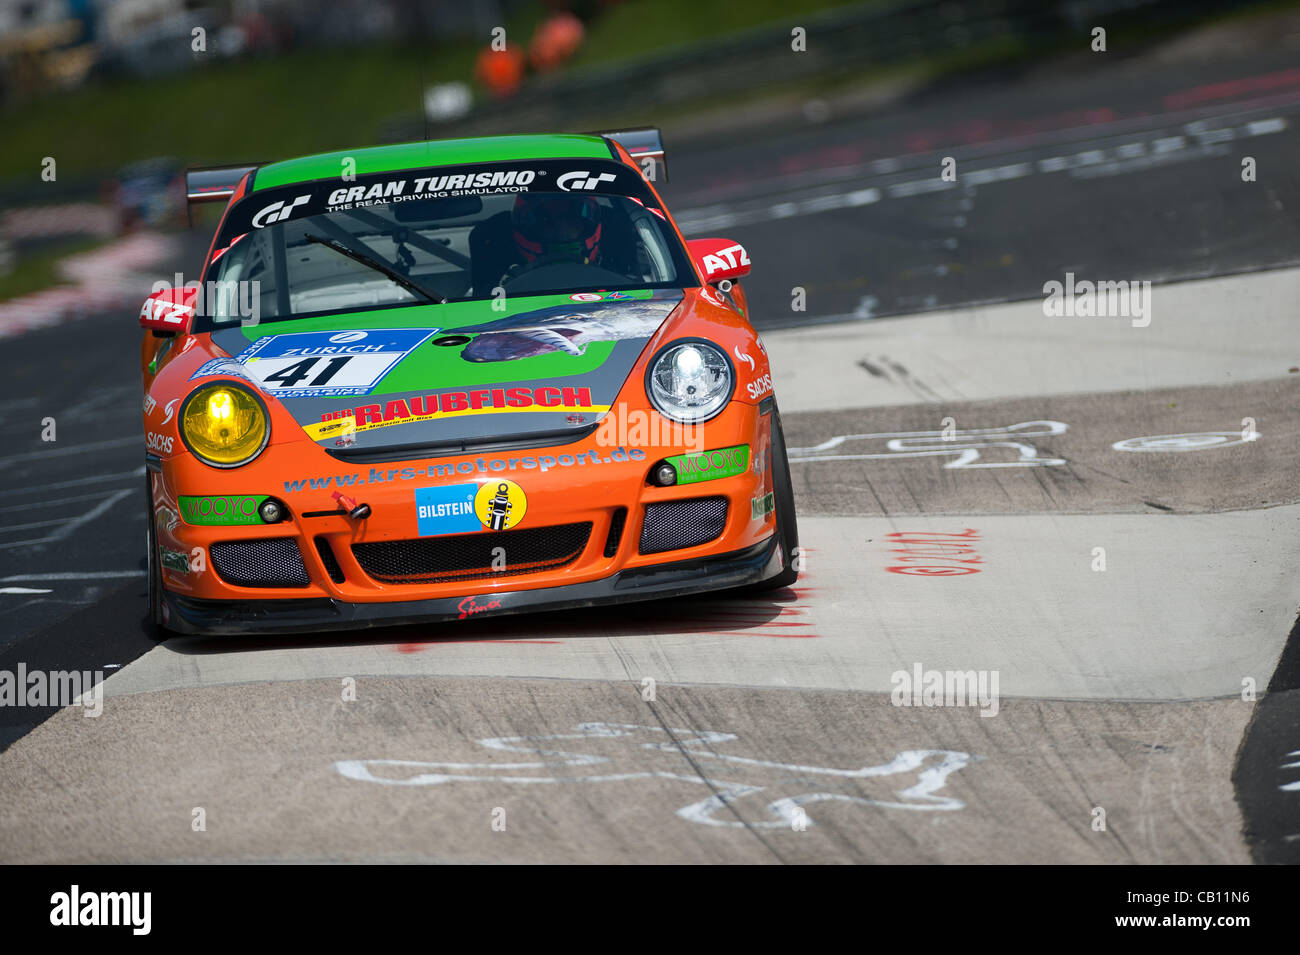 Andre Krumback (GER) / Harald Schlotter (GER) / Holger Fuchs (GER) / Malte Mahlert (GER) driving the #41 SP7 Porsche 911 GT3 during practice for the Nurburgring 24 hour race near Nurburg, Germany on May 17, 2012. Photo: Matt Jacques Stock Photo